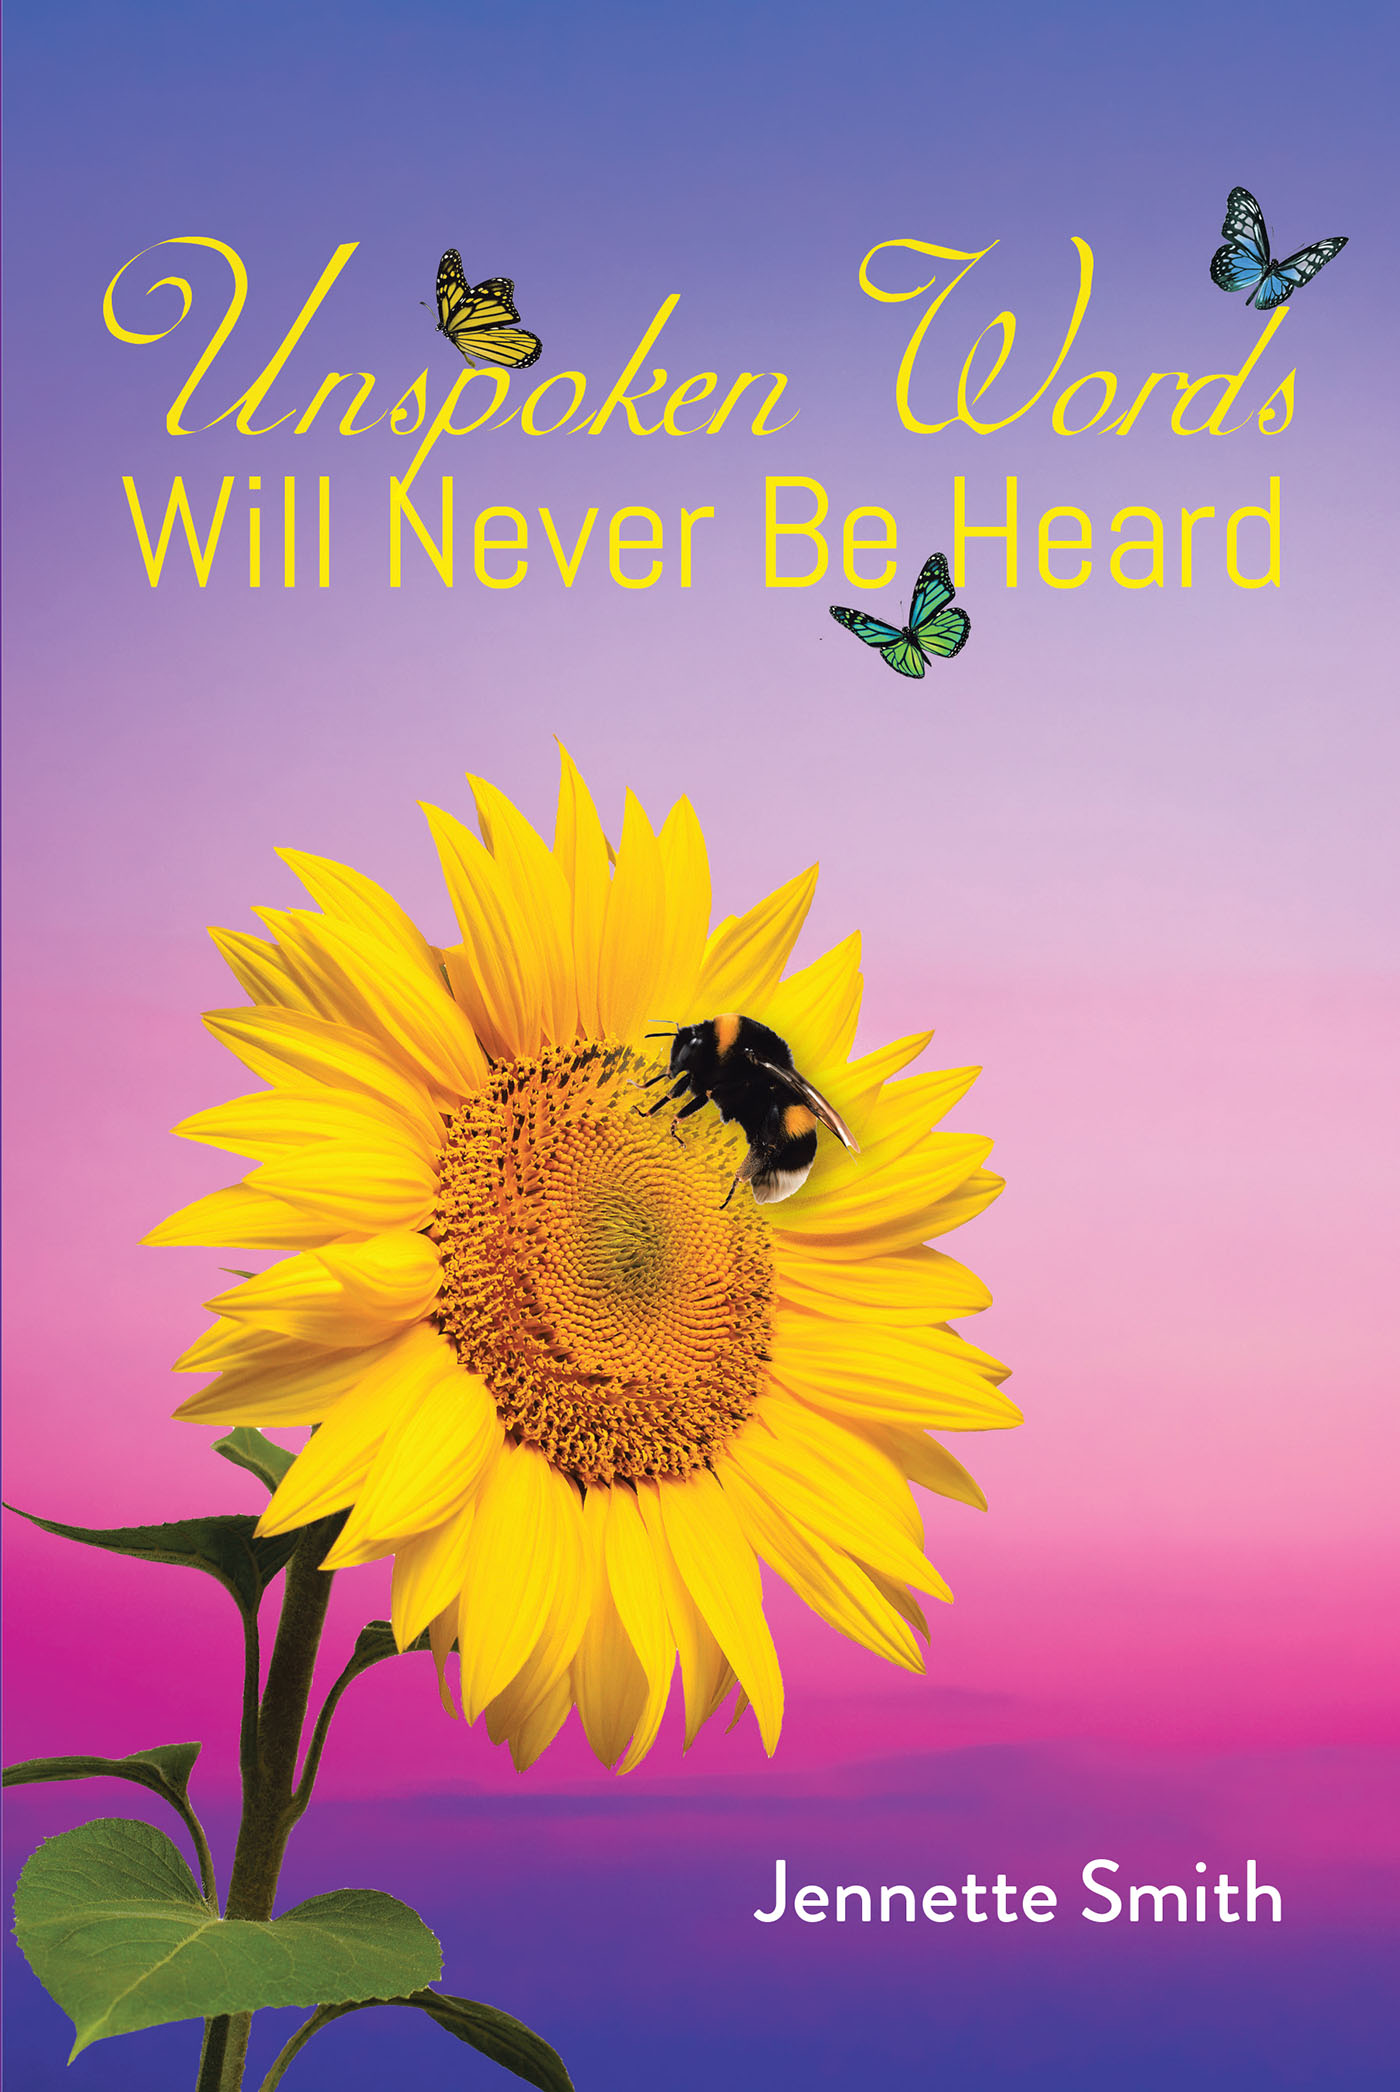 Jennette Smith’s Newly Released "Unspoken Words Will Never Be Heard" is a Comforting Devotional Meant to Bring Strength During Times of Strife